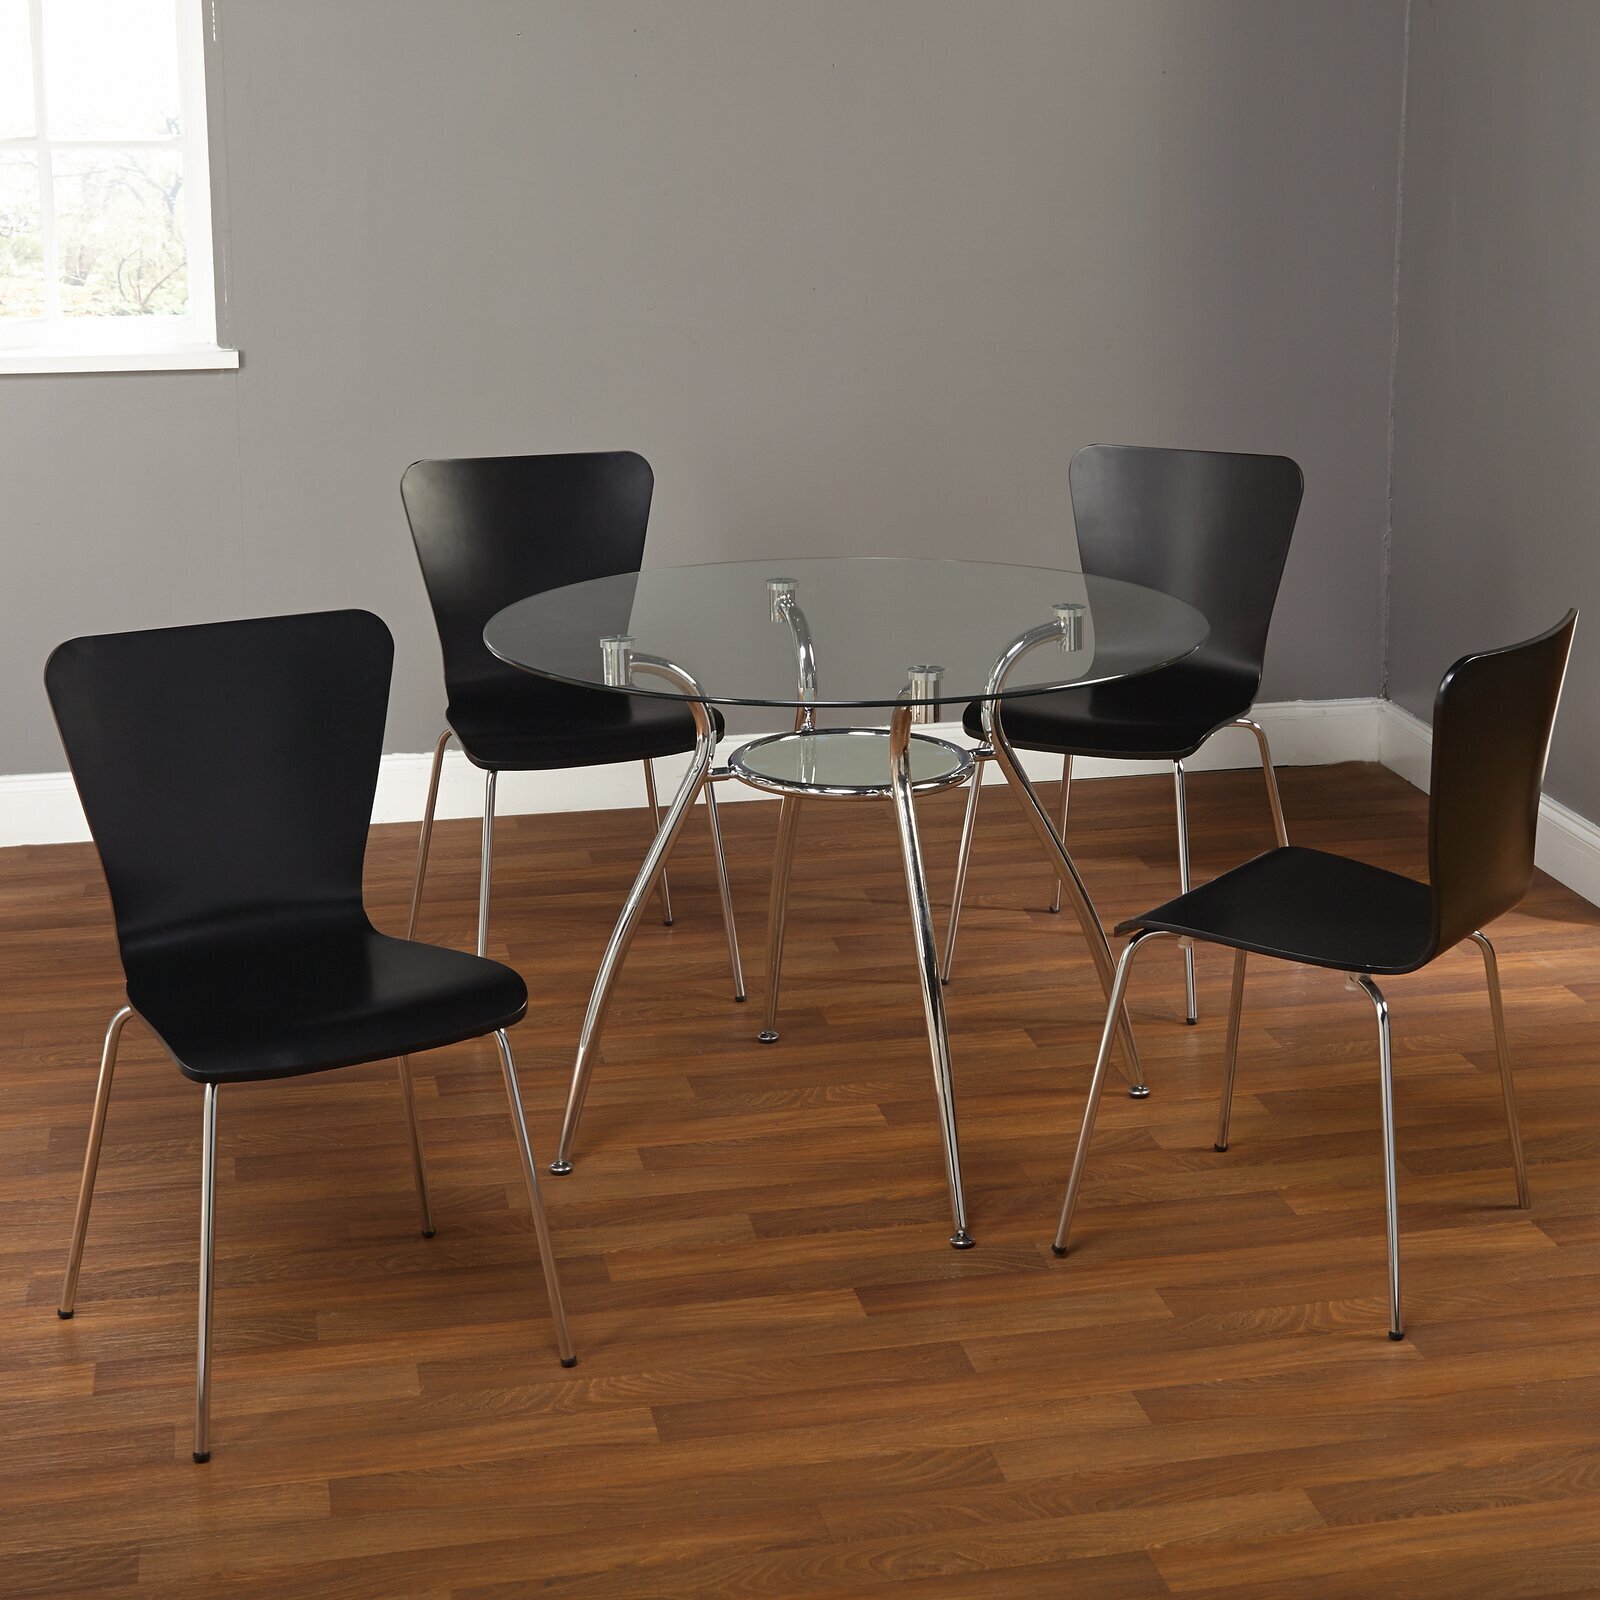 Versatile Simple Modern Table With Black Wooden Chairs 